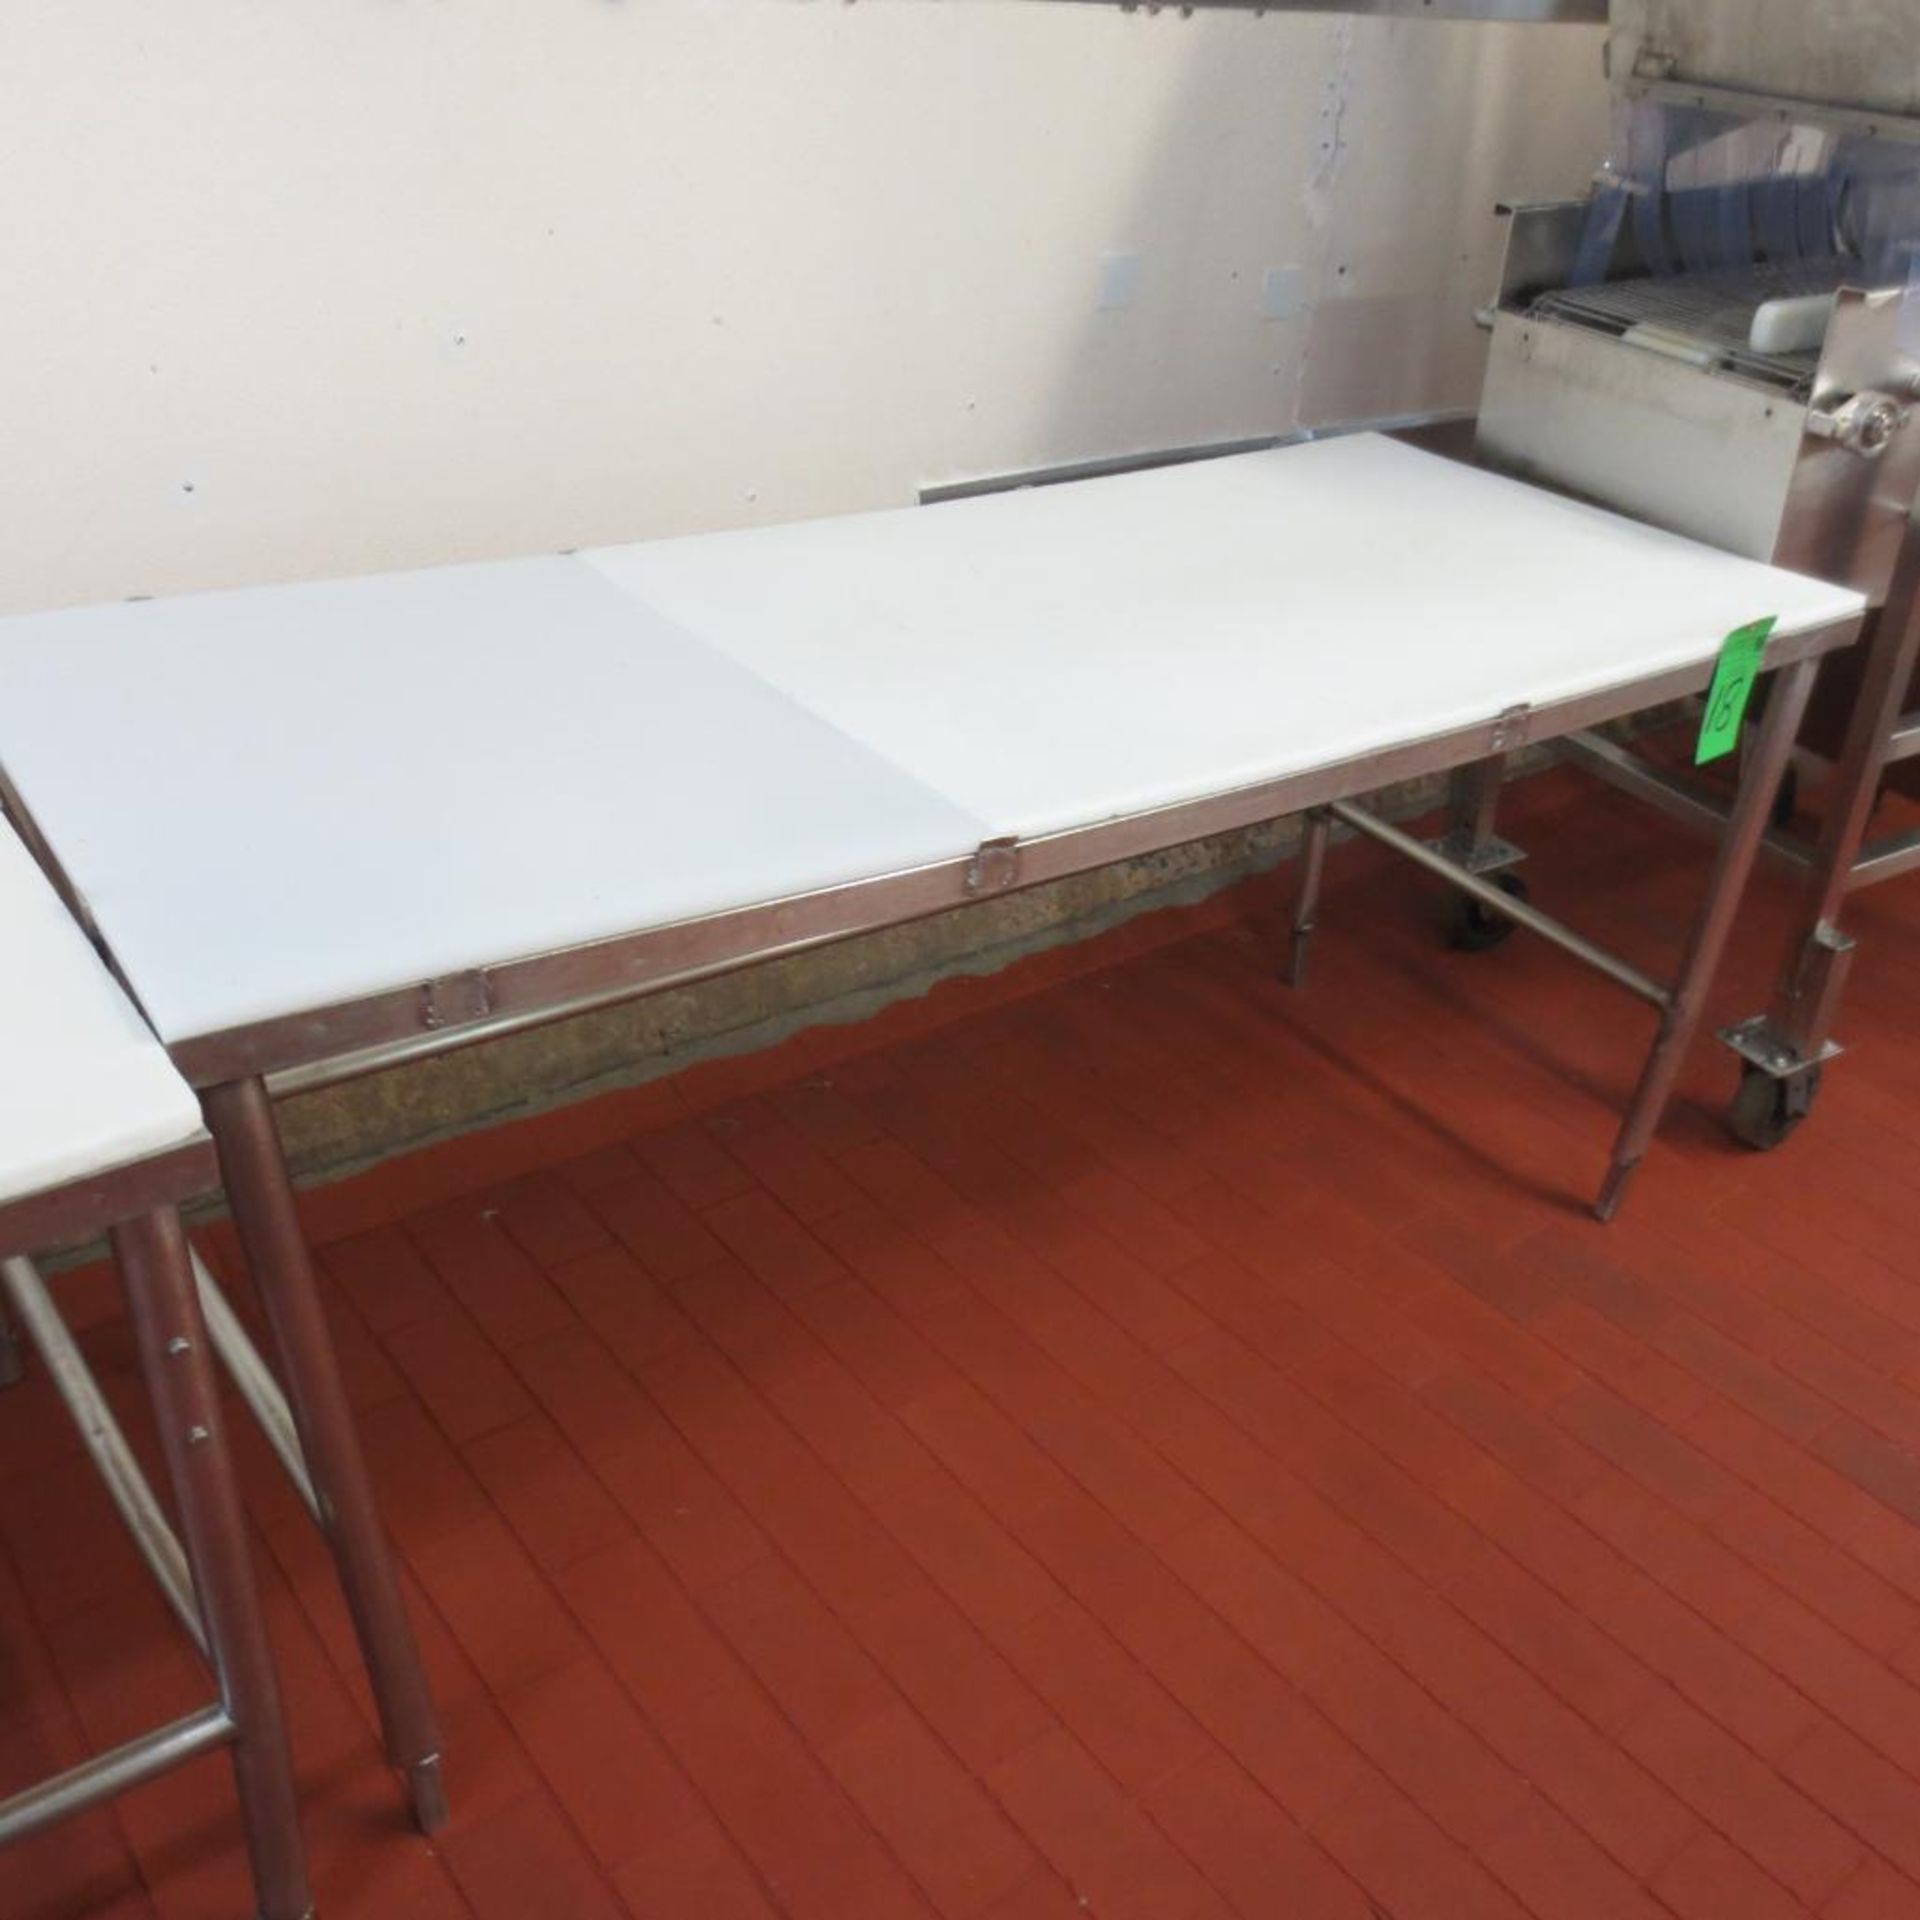 6' X 30" Stainless Table Frame with (1) 30" X 24" Cutting Board Table Top and (1) 48" X 30" Cutting - Image 2 of 2